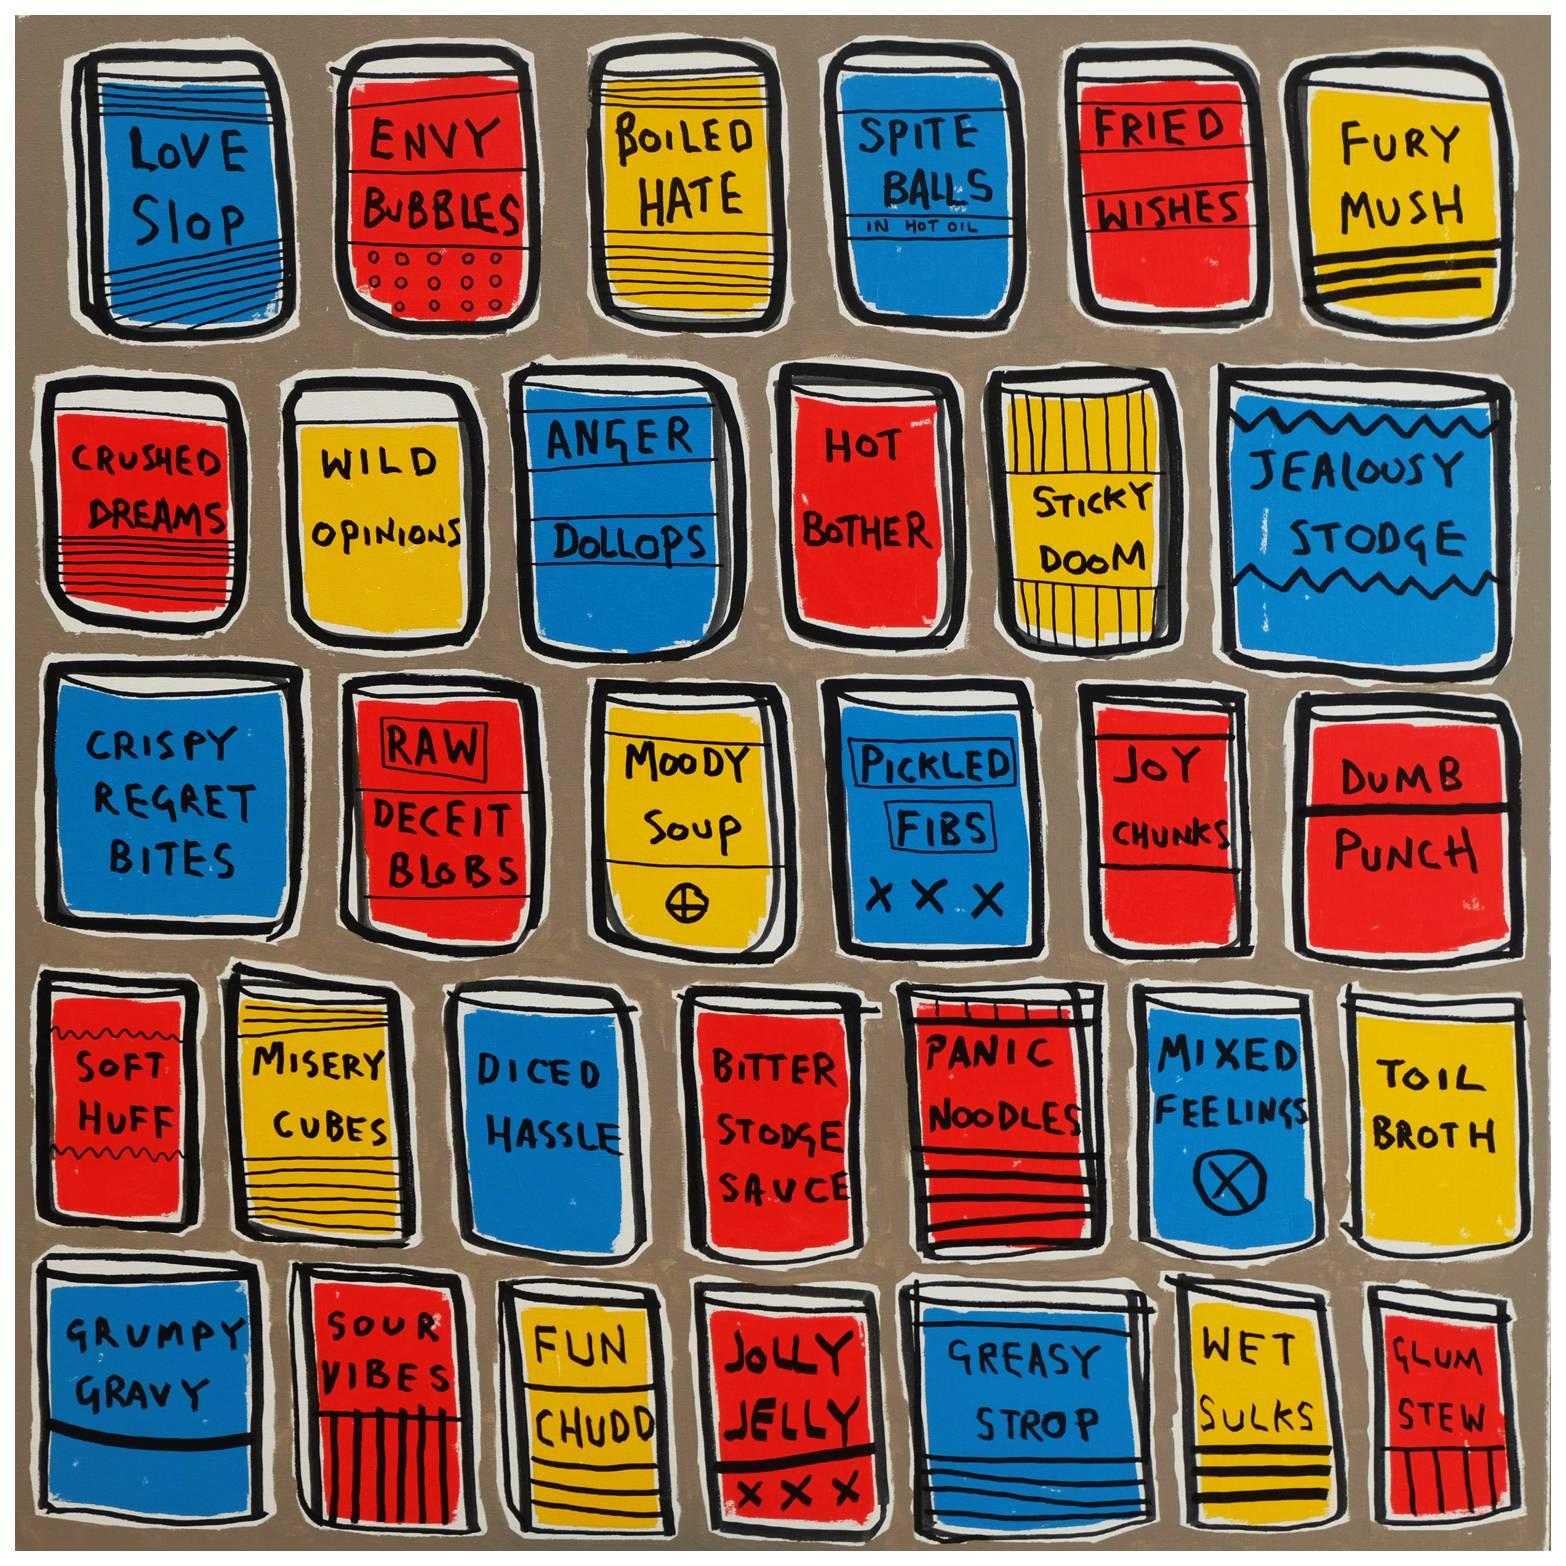 '32 Flavours' Pop Art Painting by Alan Fears